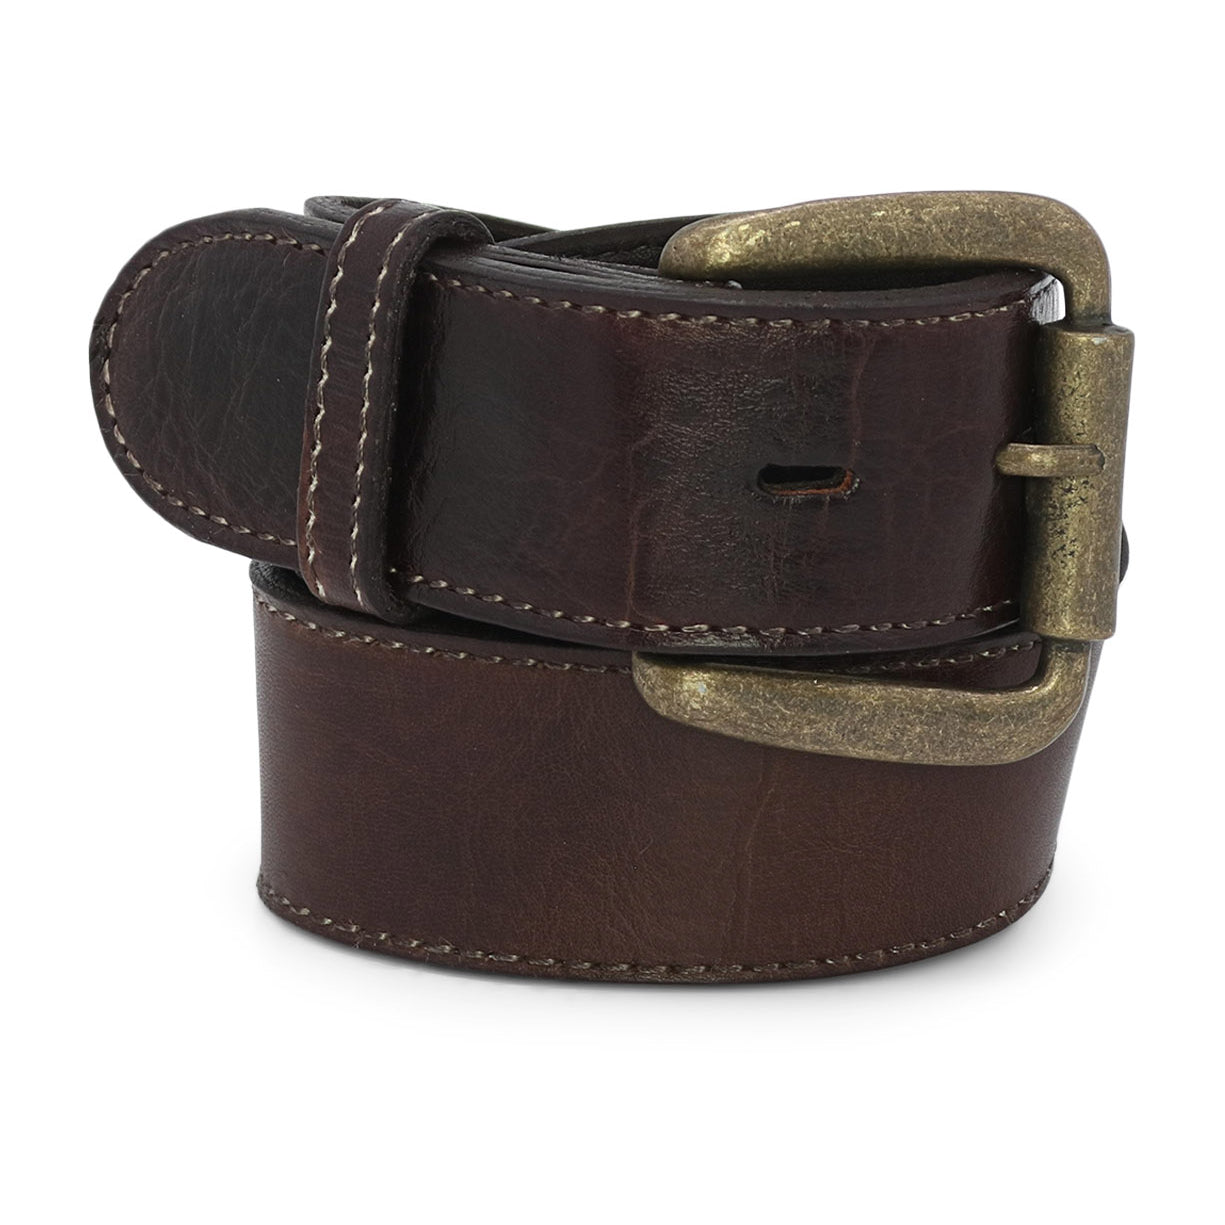 A coiled dark brown distressed leather belt with a brass buckle, isolated on a white background.